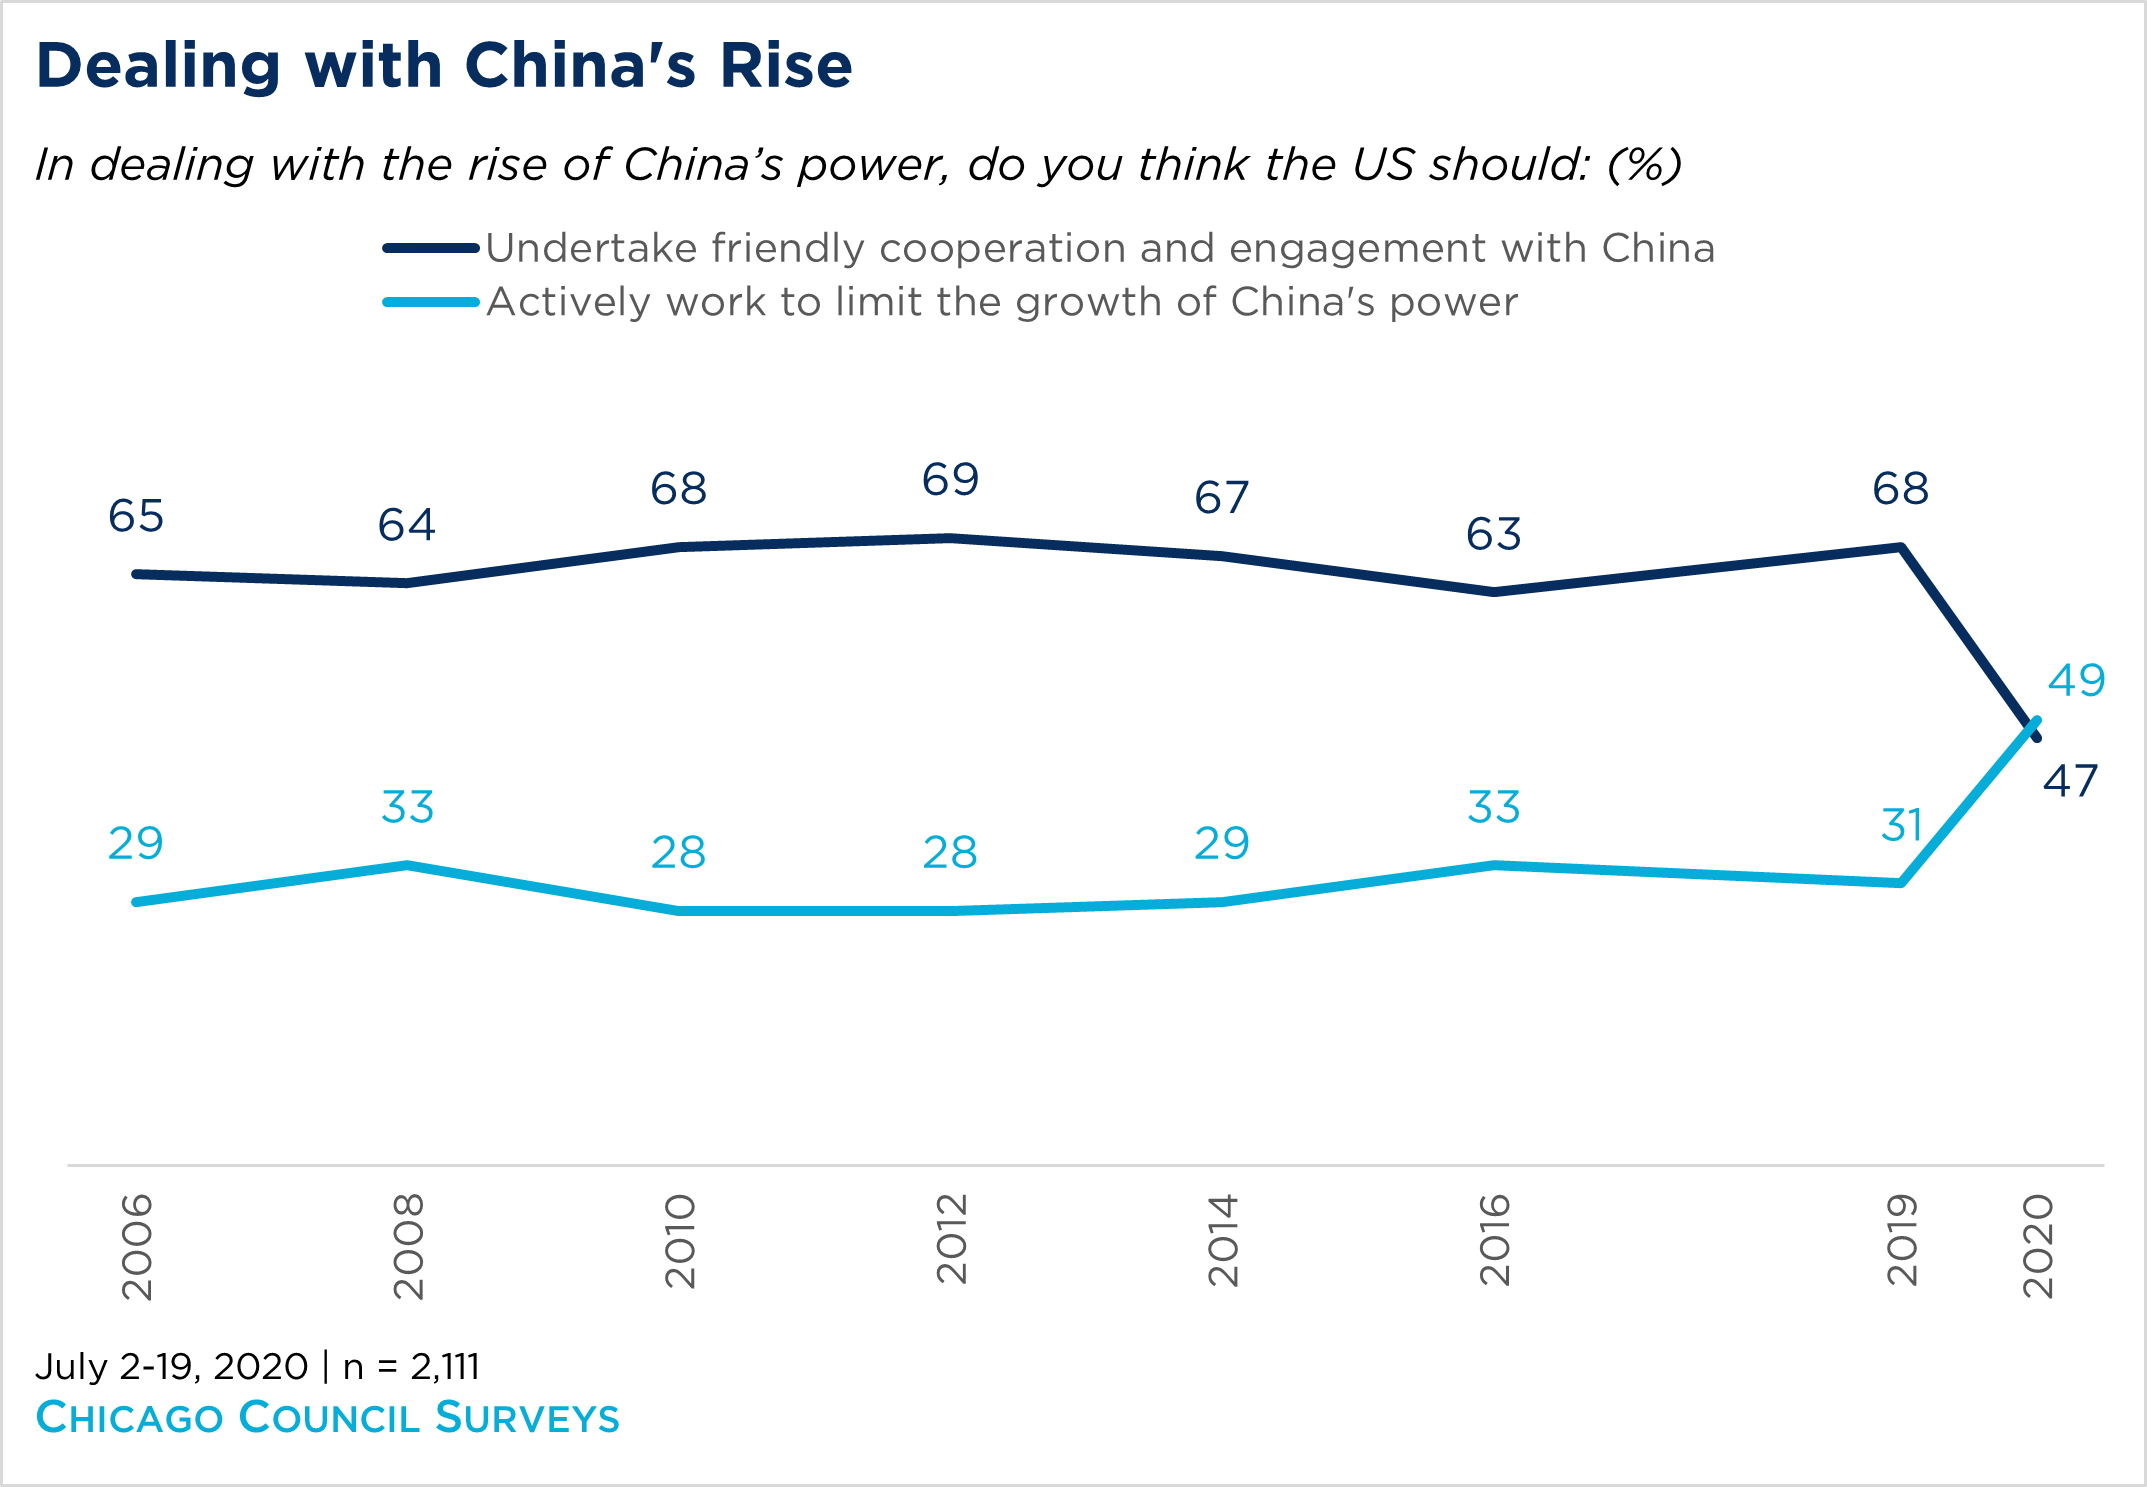 Chart showing how Americans think the US should deal with China's rise